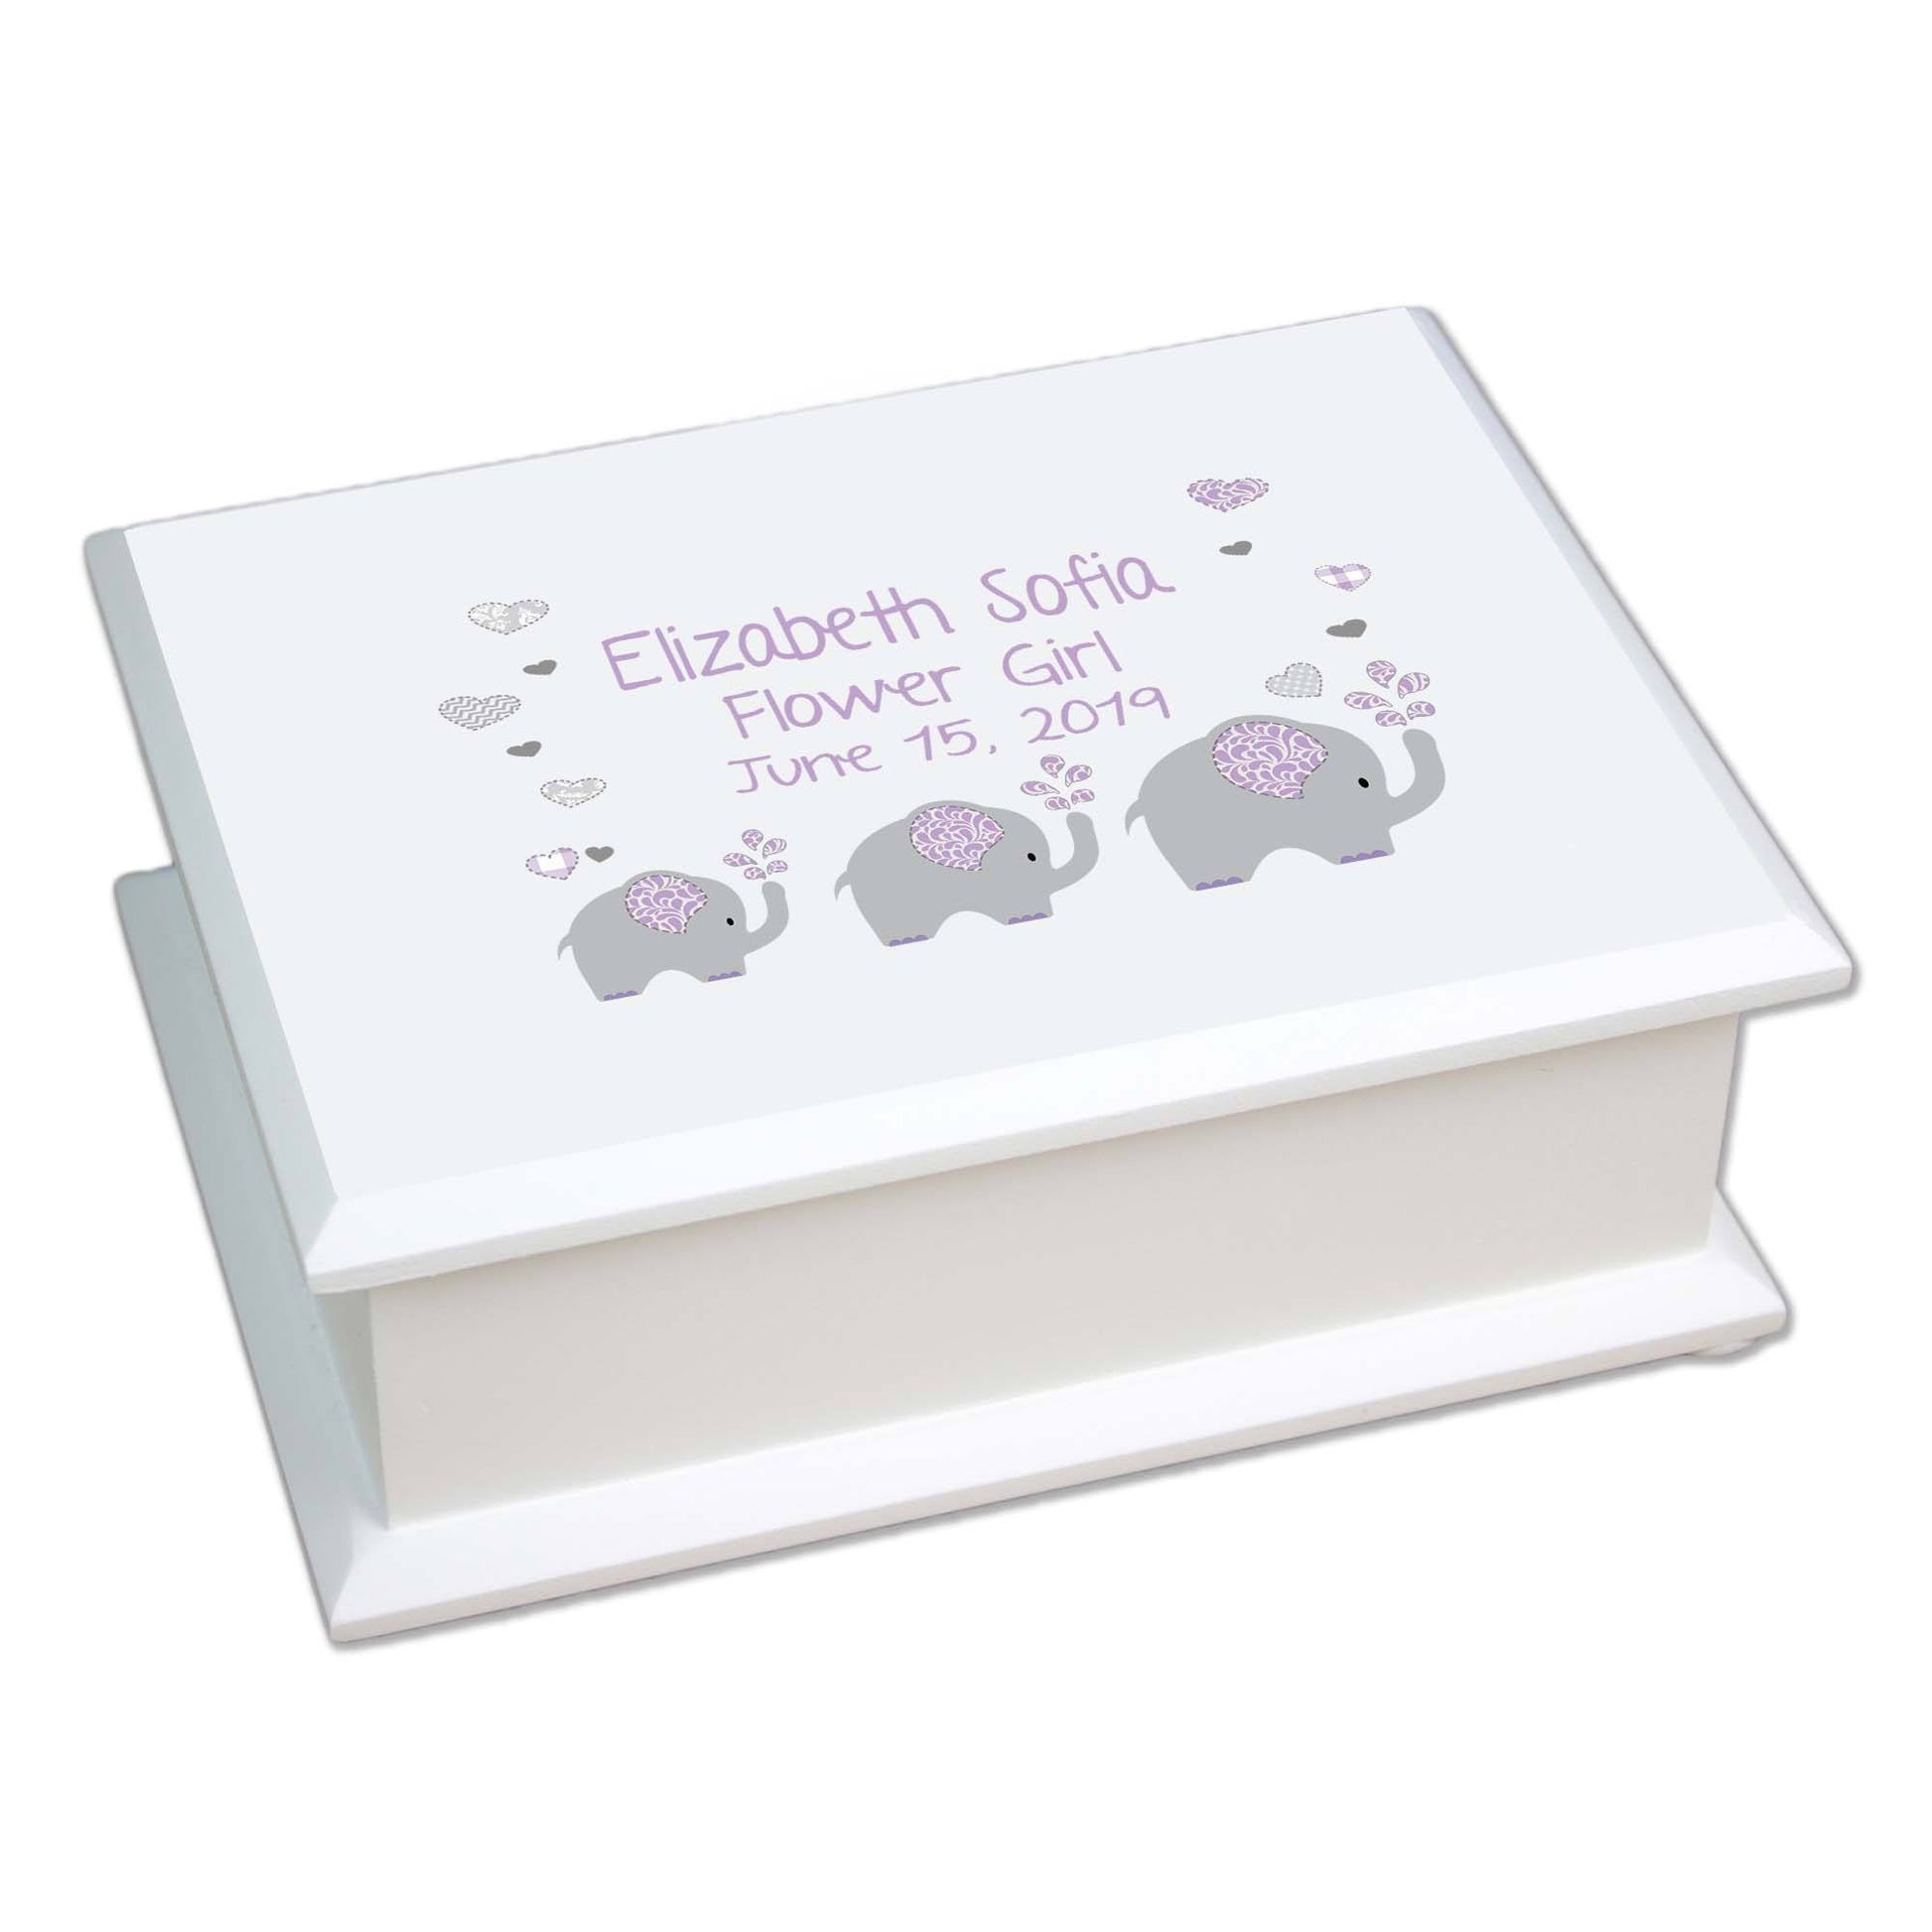 Personalized Lift Top Jewelry Box with Lavender Elephant design